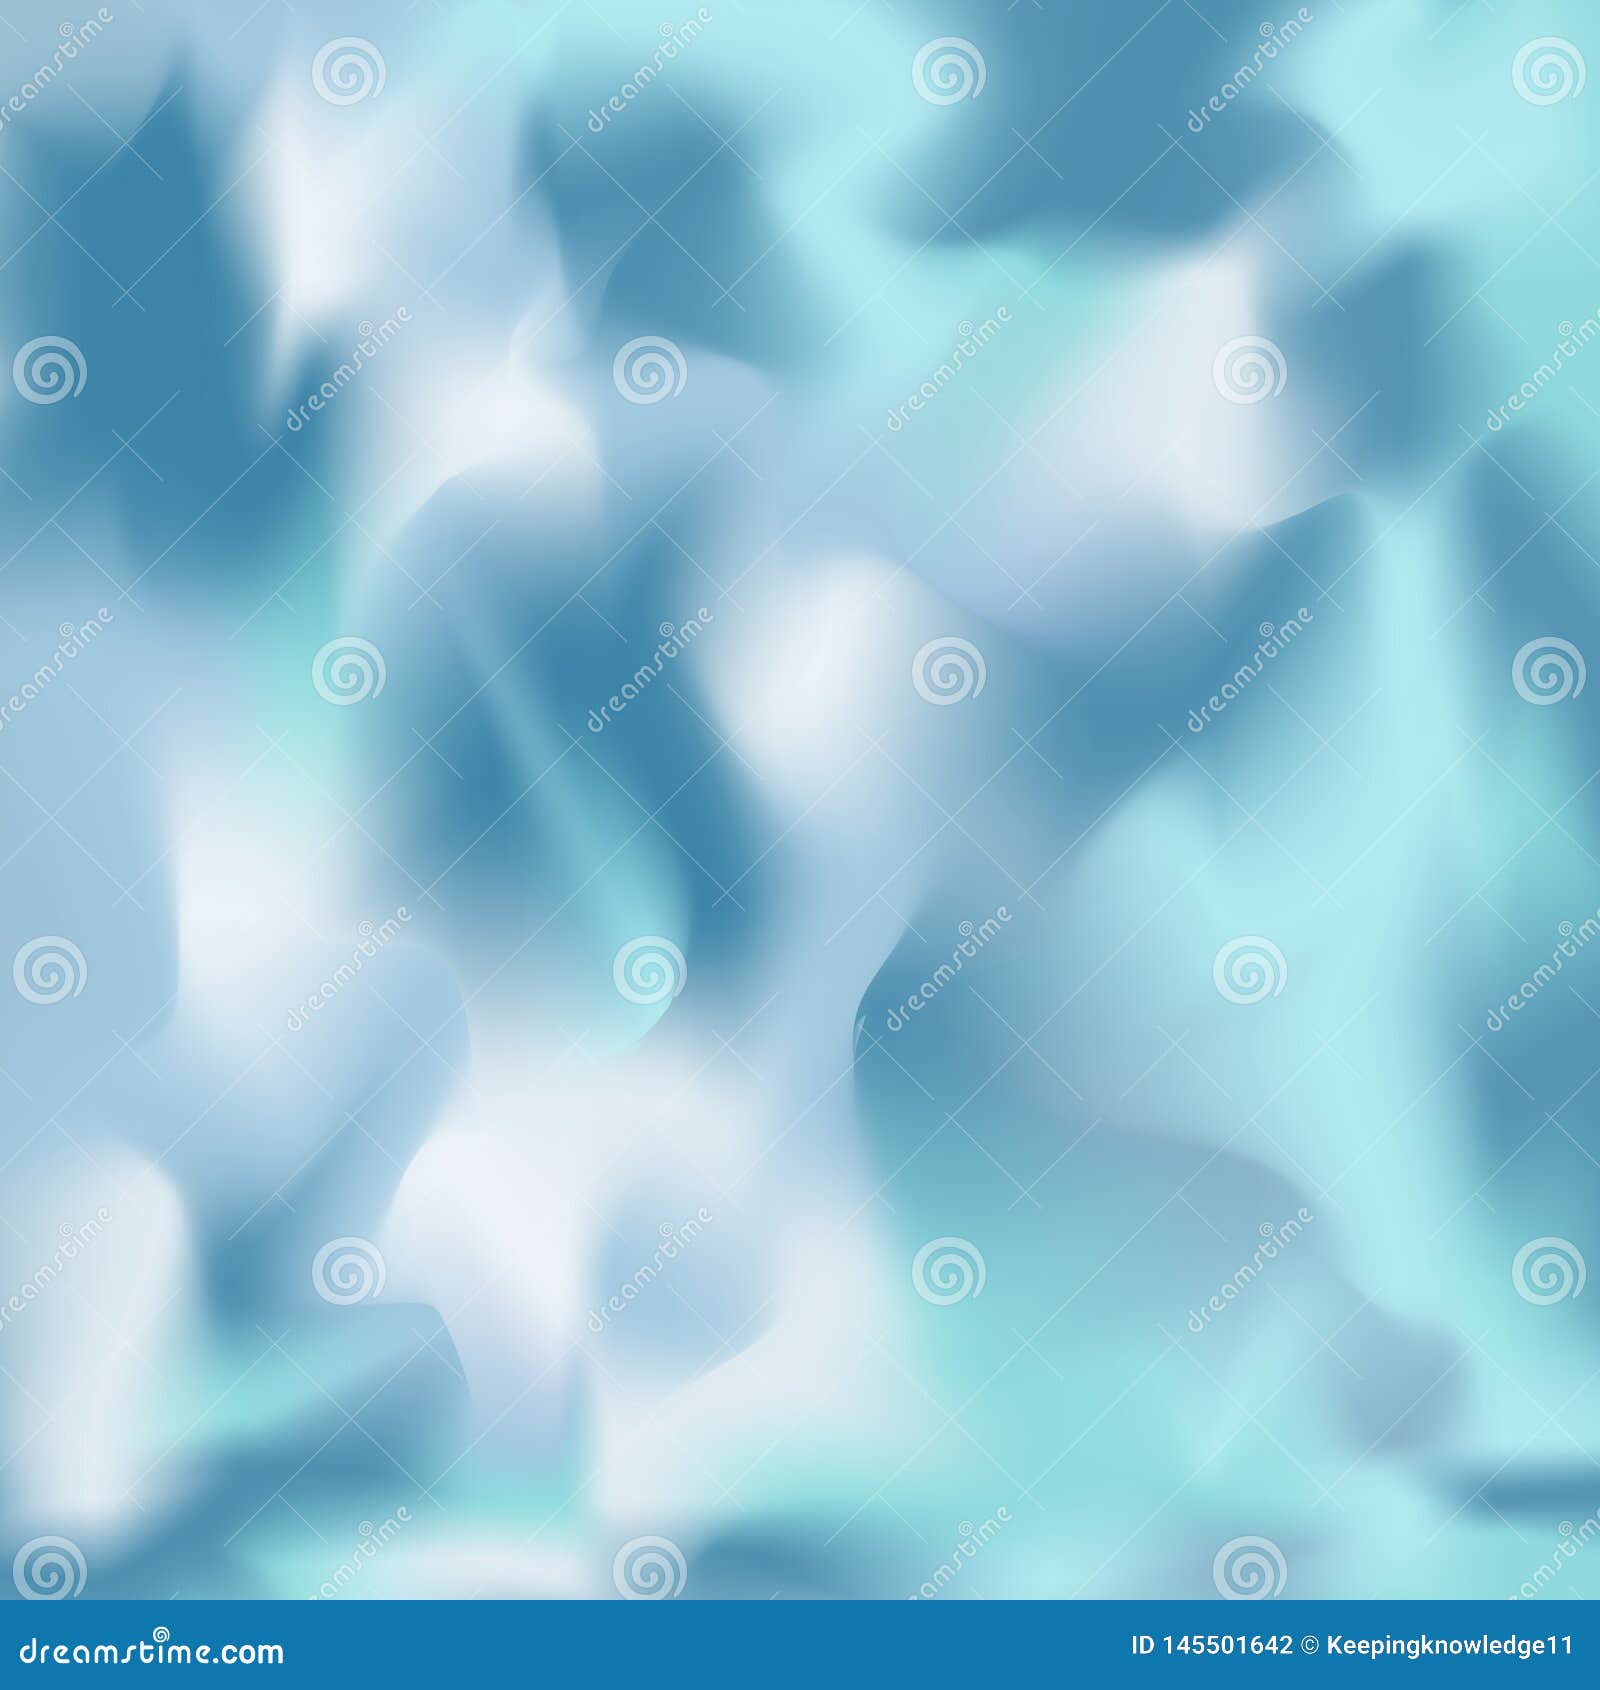 Blurred Abstract Multicolor Background of Light and Dark Blue Shades,  Sometimes with Blue-green Tint Stock Vector - Illustration of backdrop,  elegant: 145501642